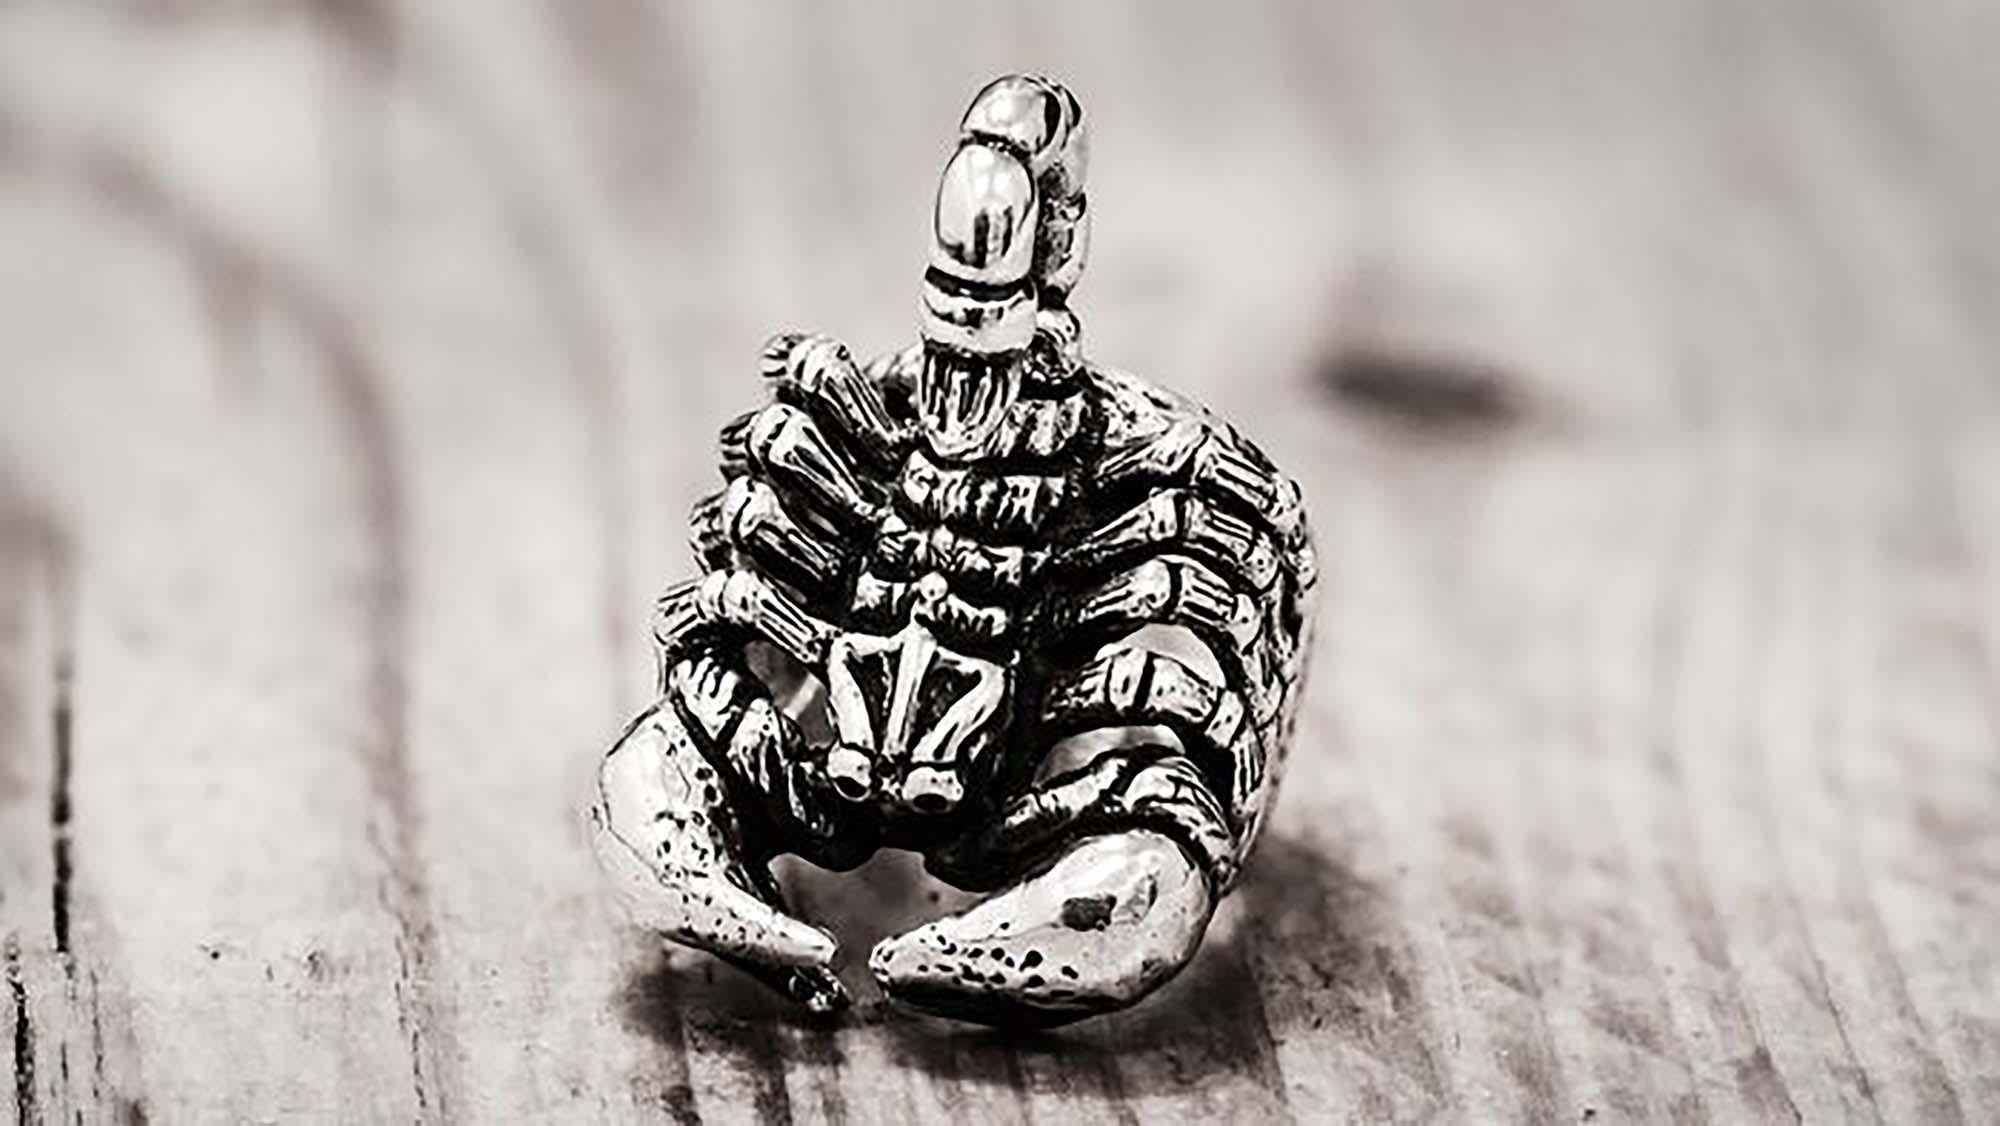 Vintage sterling silver men's Scorpio ring
Hallmarked 925

Dimensions -
Finger Size: (UK) = P (US) = 8 (EU) = 56 1/4
Ring Size : 3.4 x 2.6 x 3.9 cm
Weight: 29 g

Condition: General used, good overall condition.